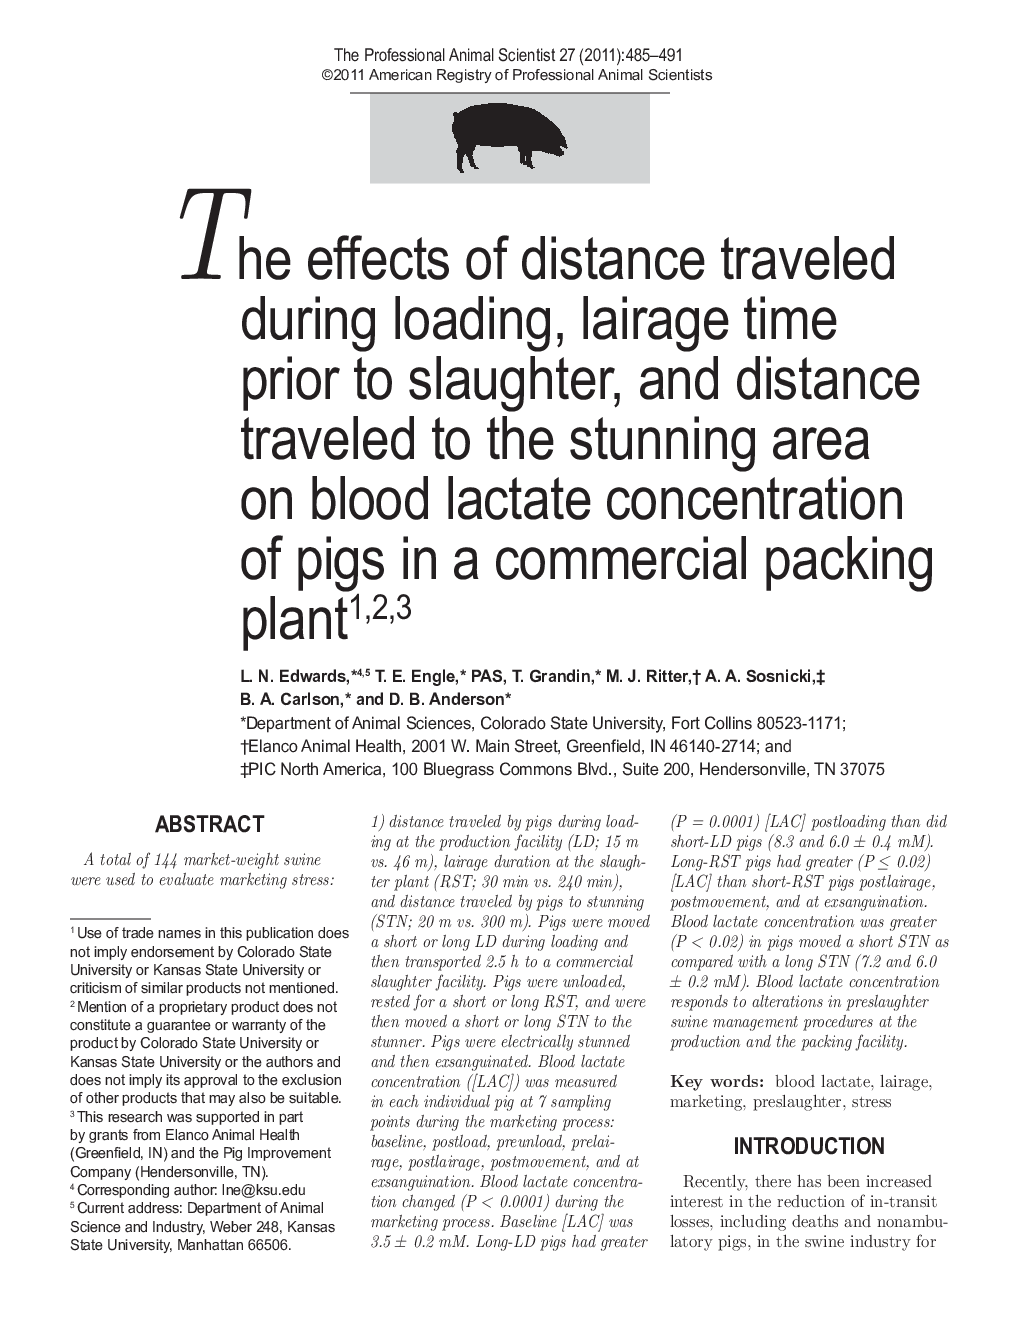 The effects of distance traveled during loading, lairage time prior to slaughter, and distance traveled to the stunning area on blood lactate concentration of pigs in a commercial packing plant1, 2, 3